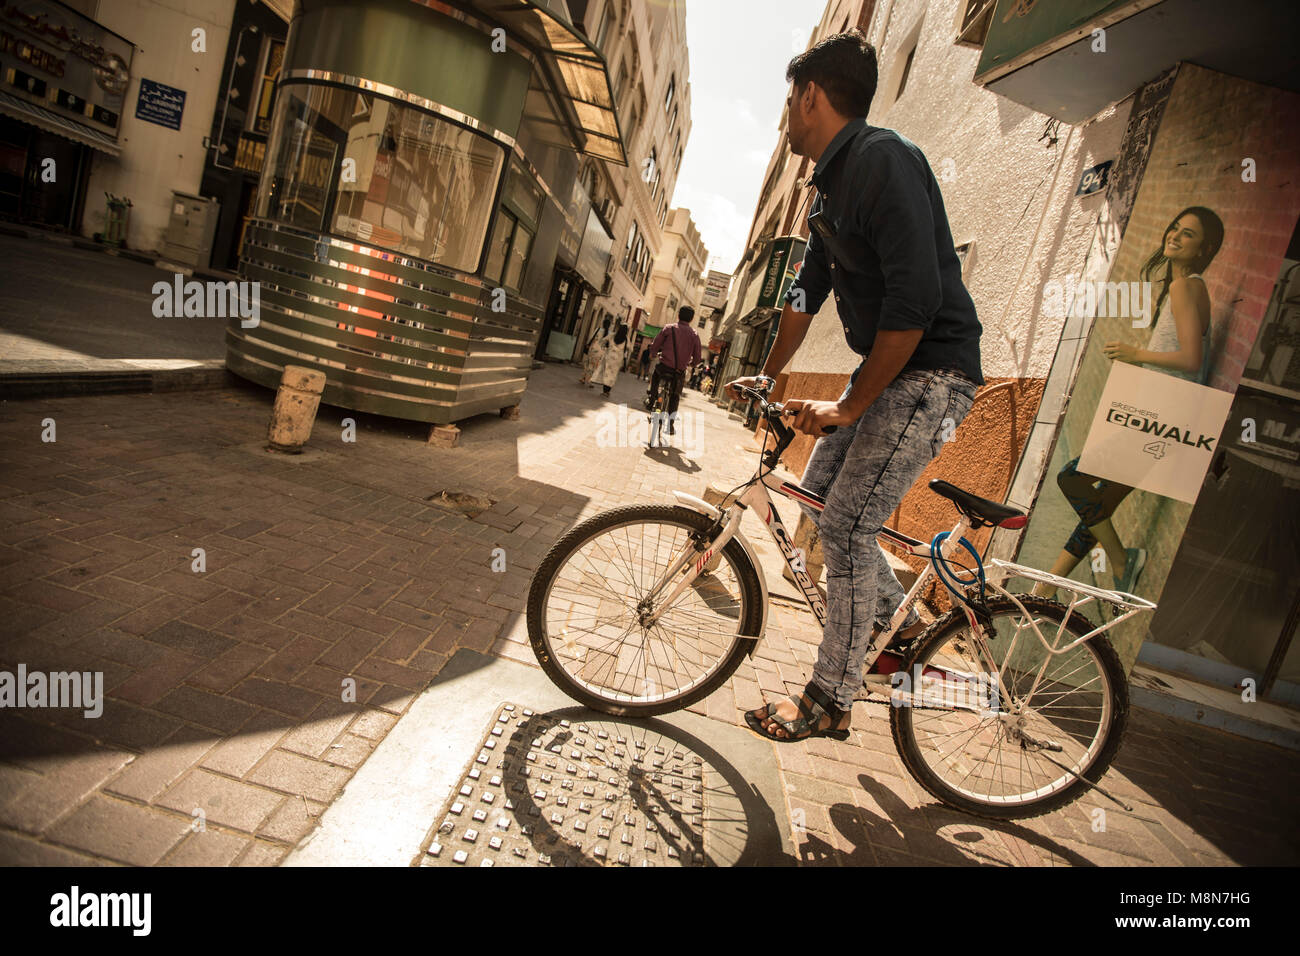 A man on a bicycle riding down the street in Dubai, UAE Stock Photo